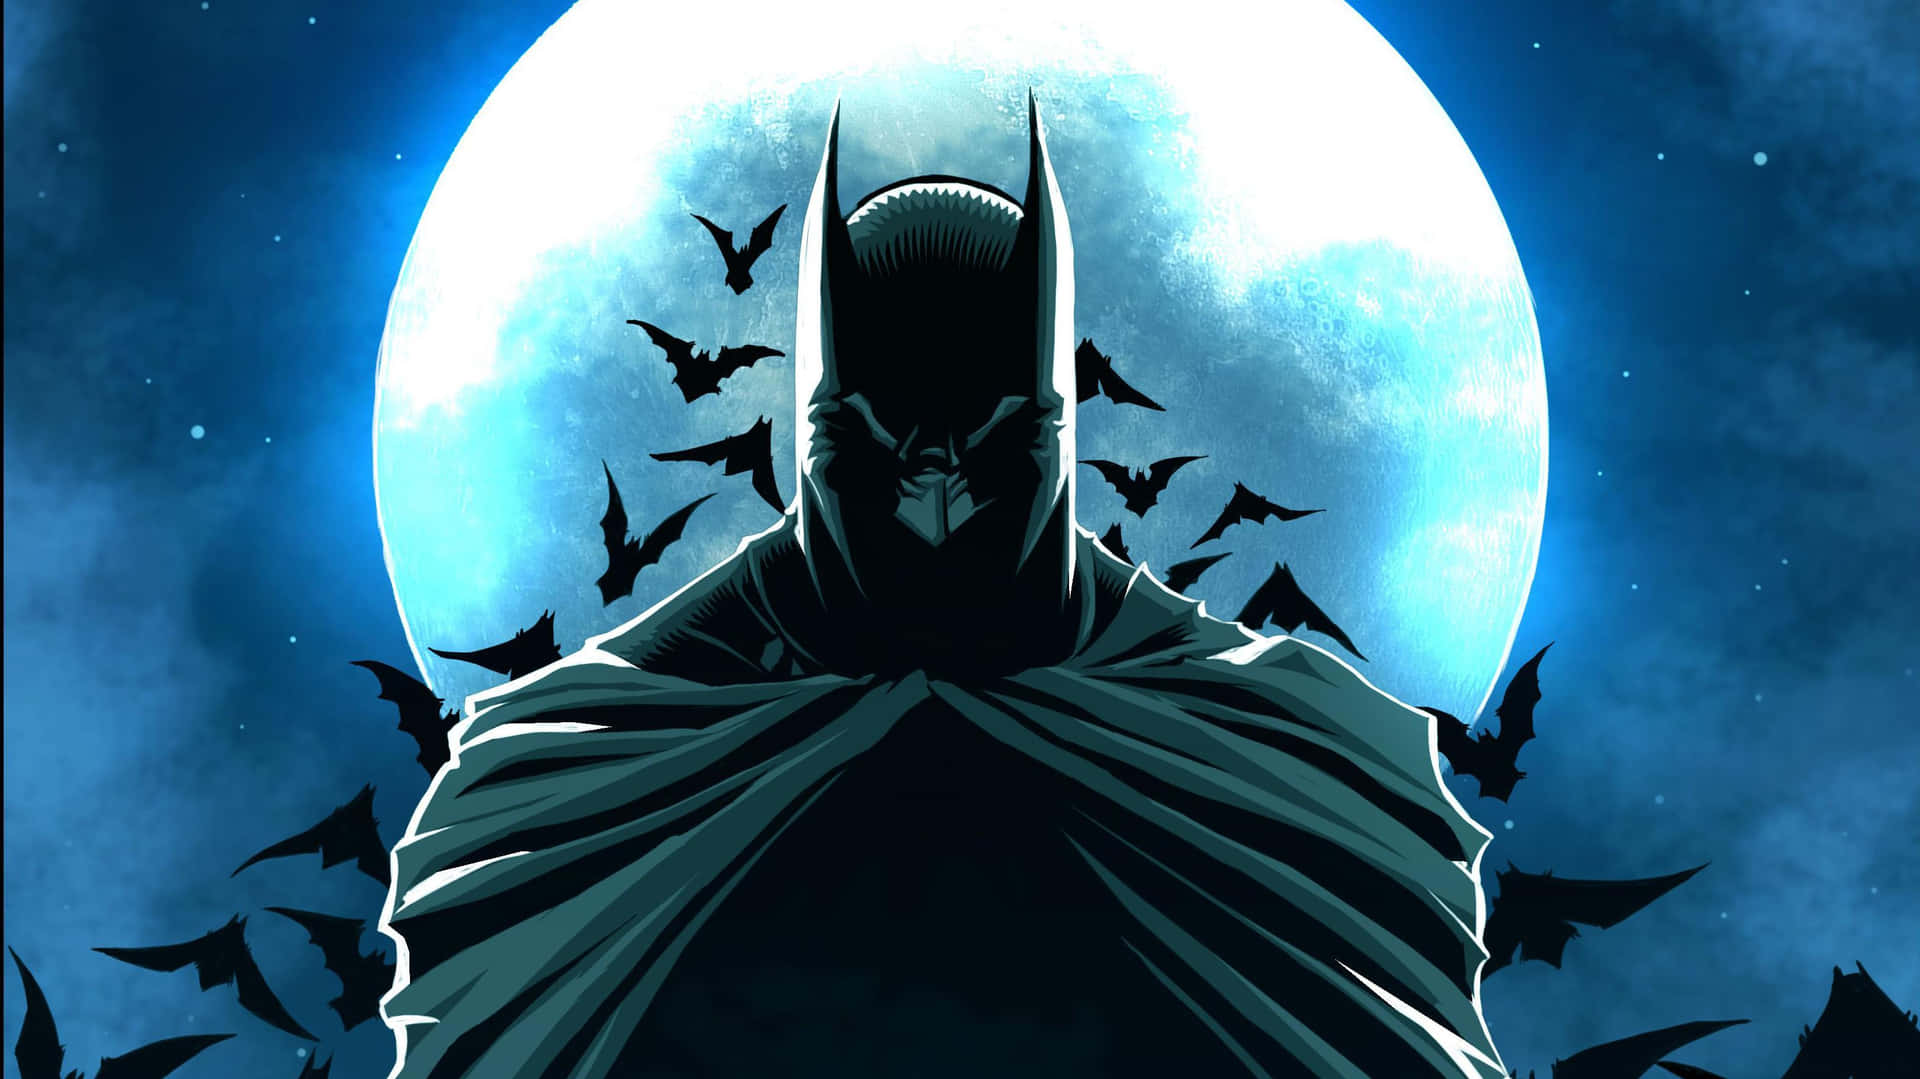 Batman In Front Of Full Moon And Bats Picture